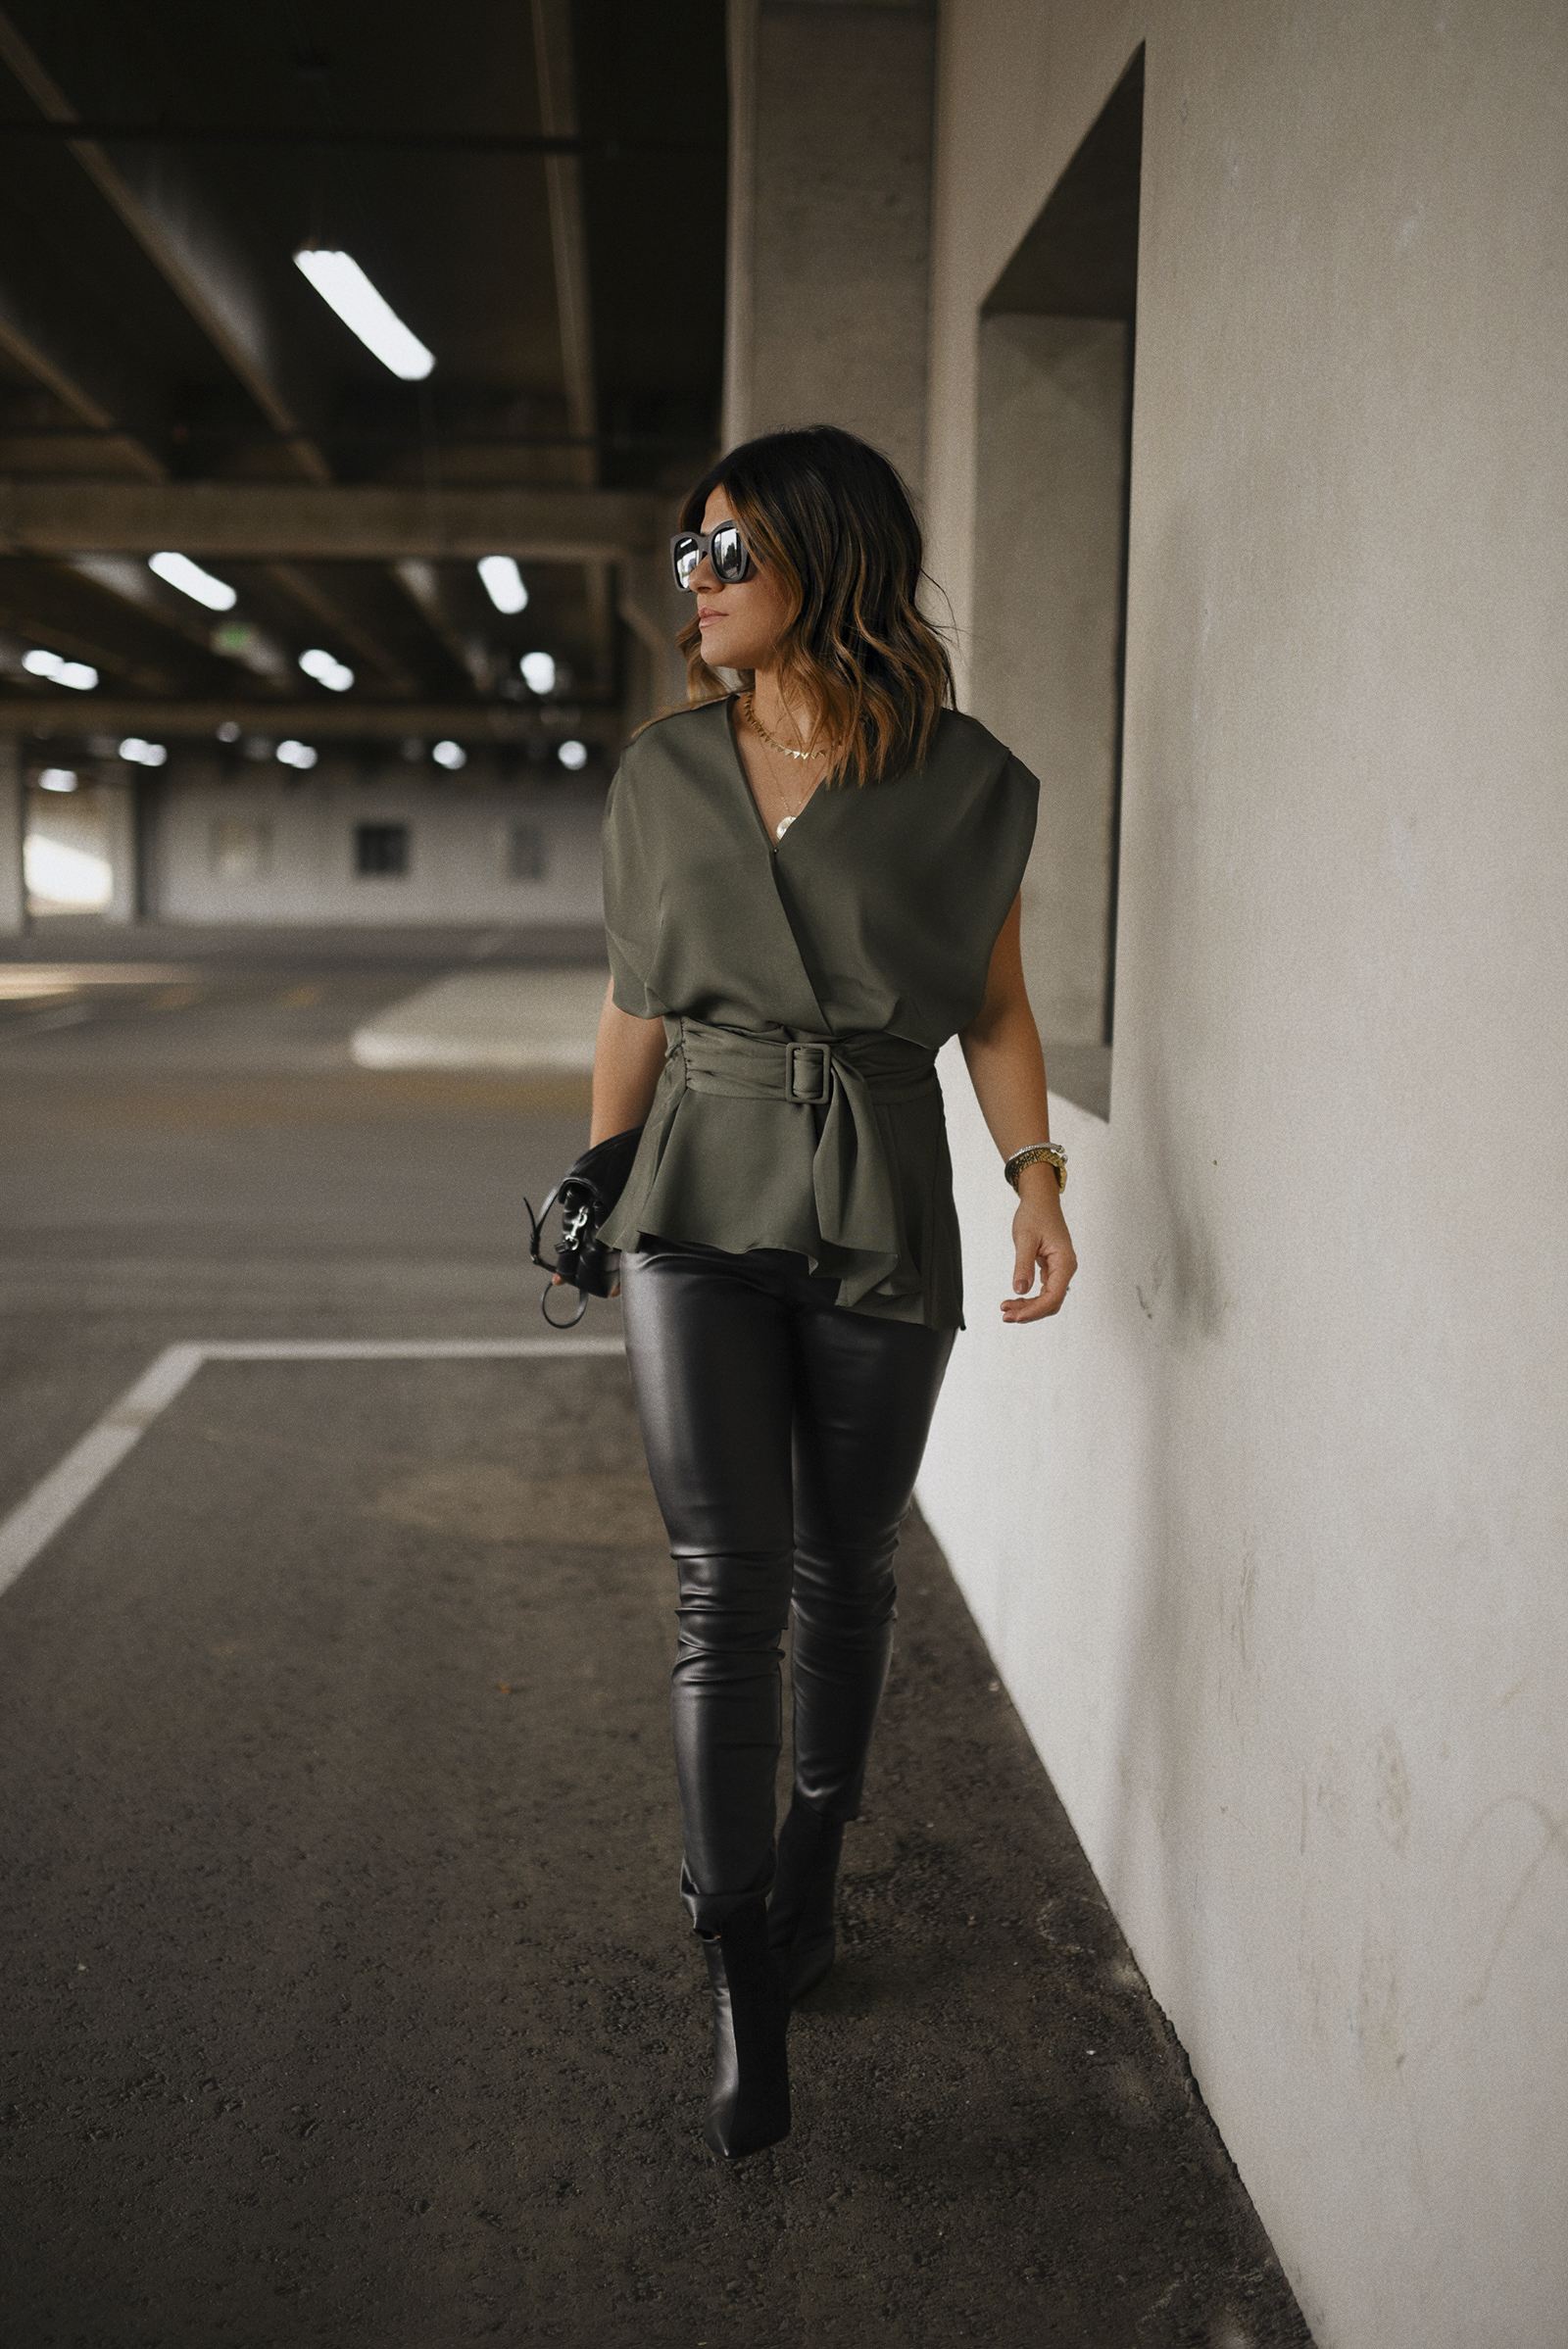 Carolina Hellal of Chic Talk wearing an Express wrap top, Sofia Jeans Faux leather pants, Lafayette148 black booties and a YSL crossbody bag. 